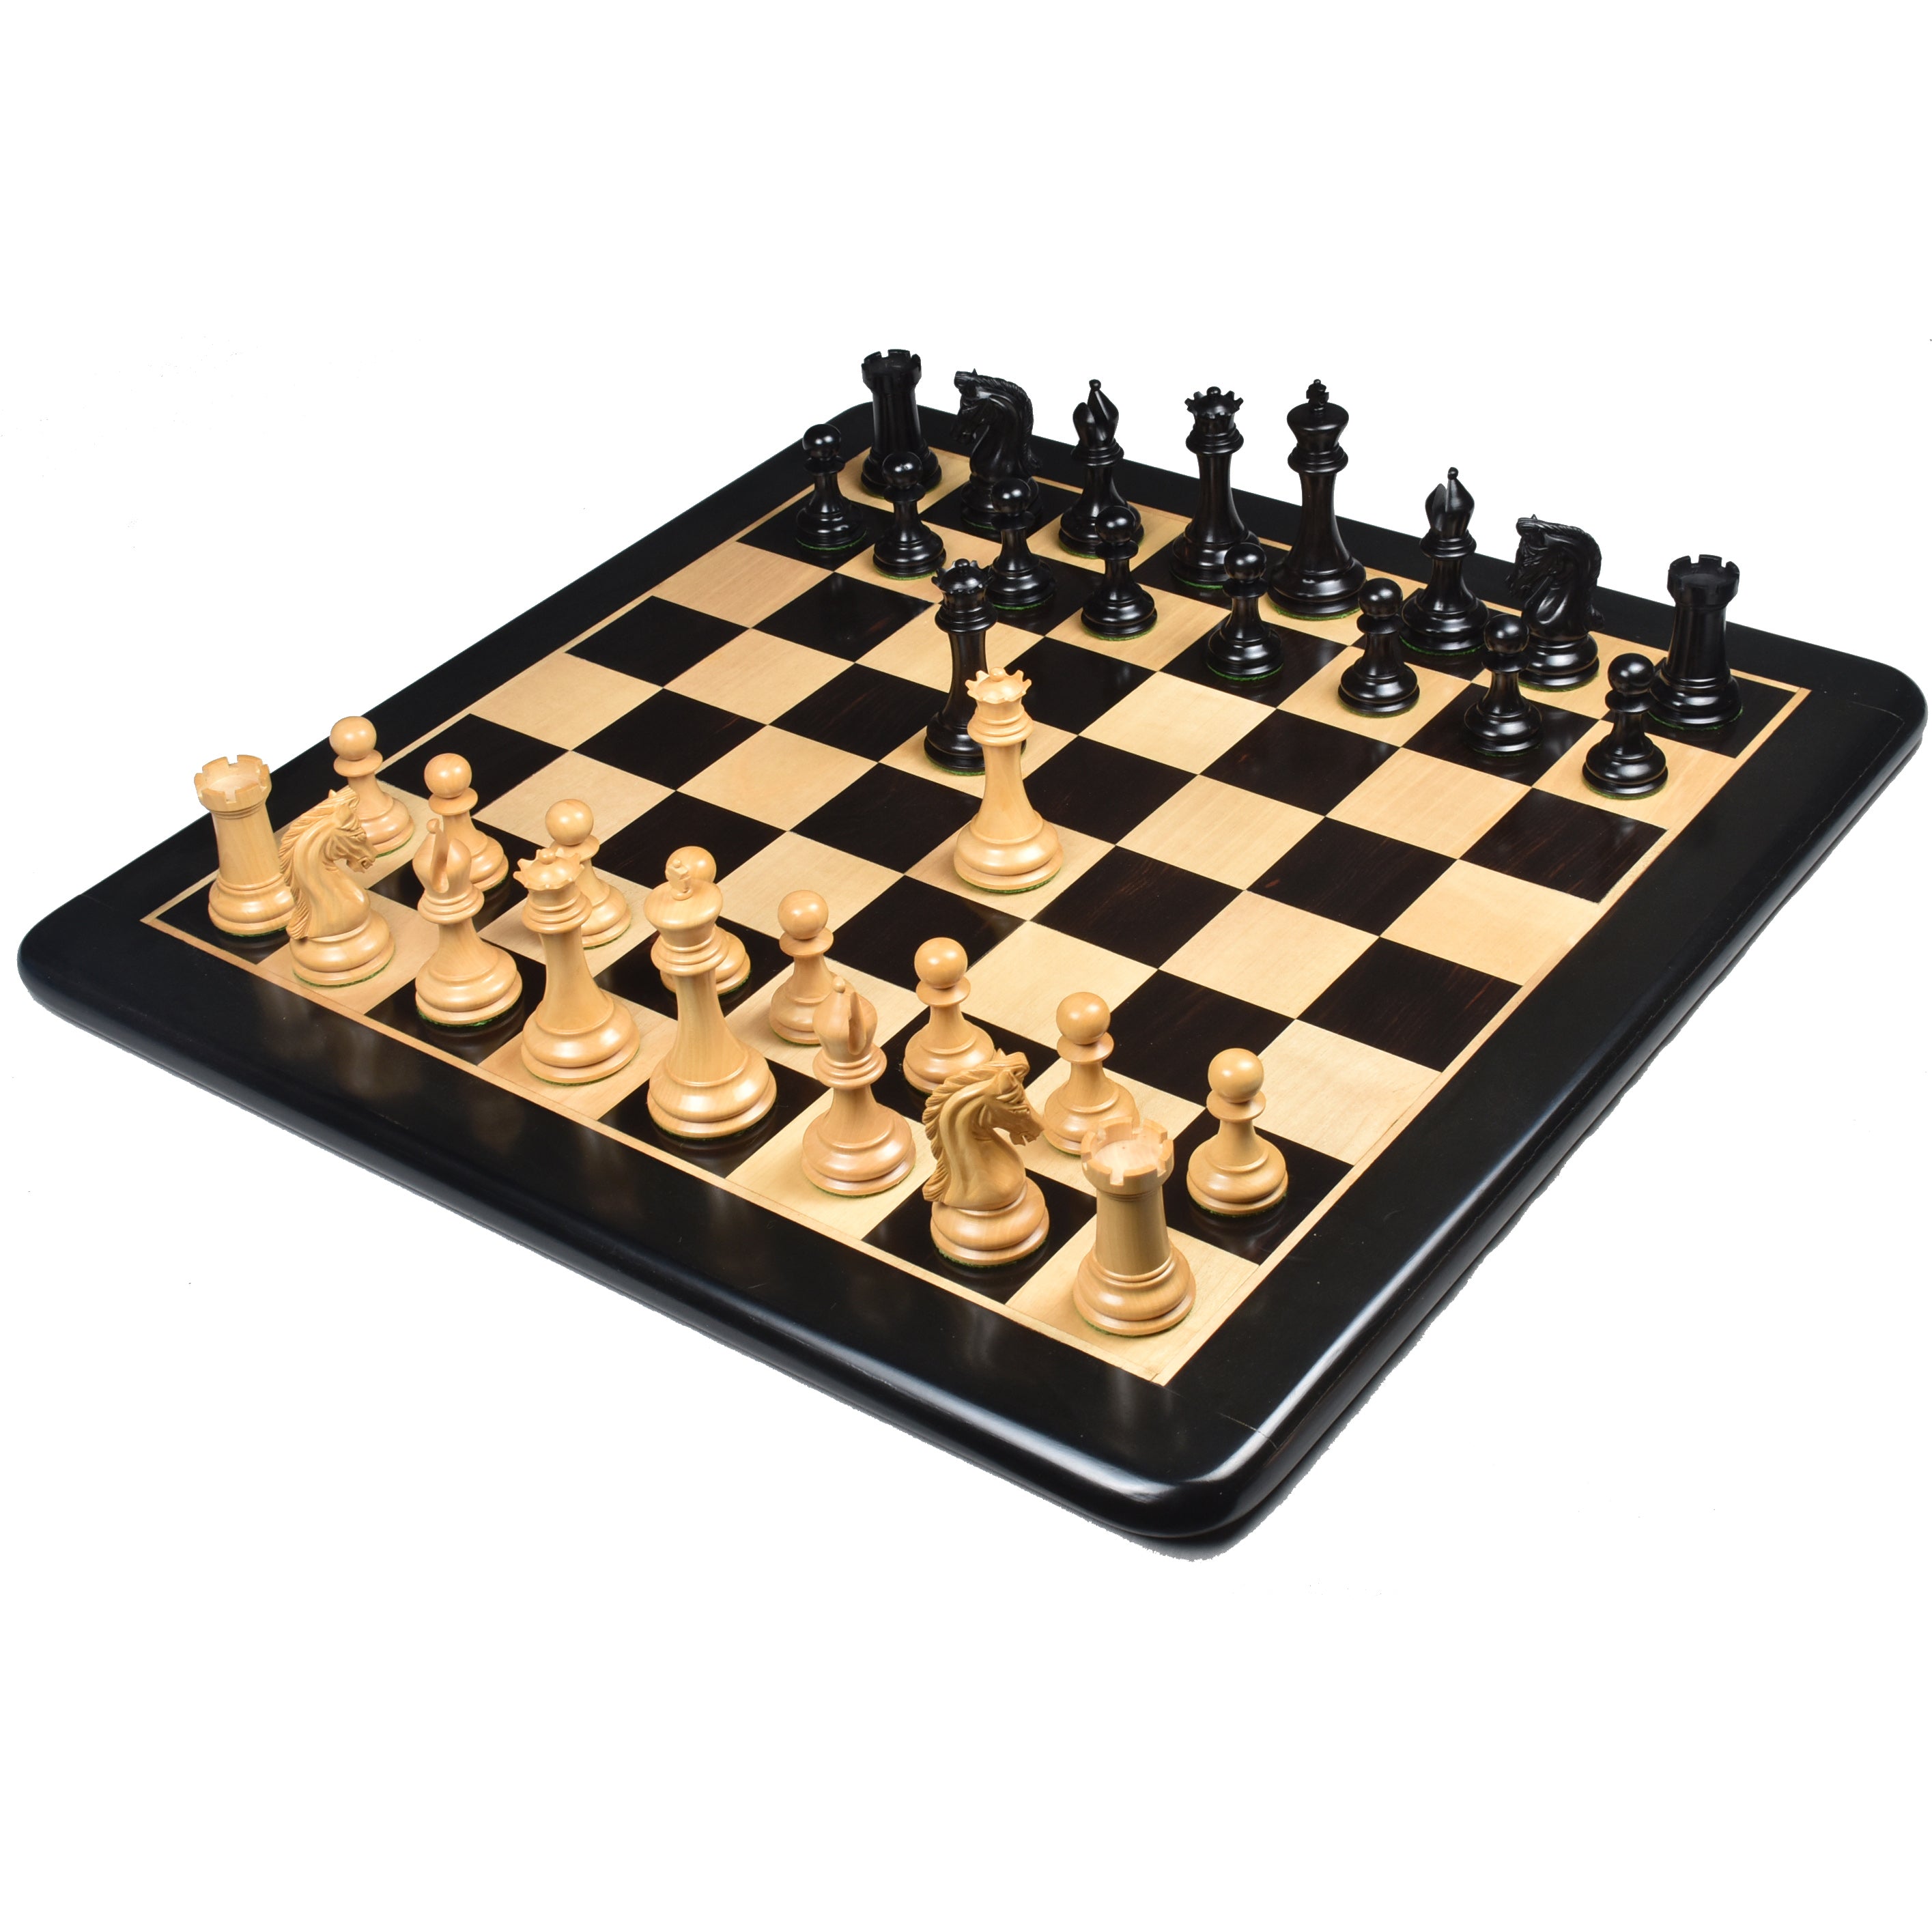 Combo of Repro 2016 Sinquefield Staunton Chess Set - Pieces in Ebony Wood with Board and Box